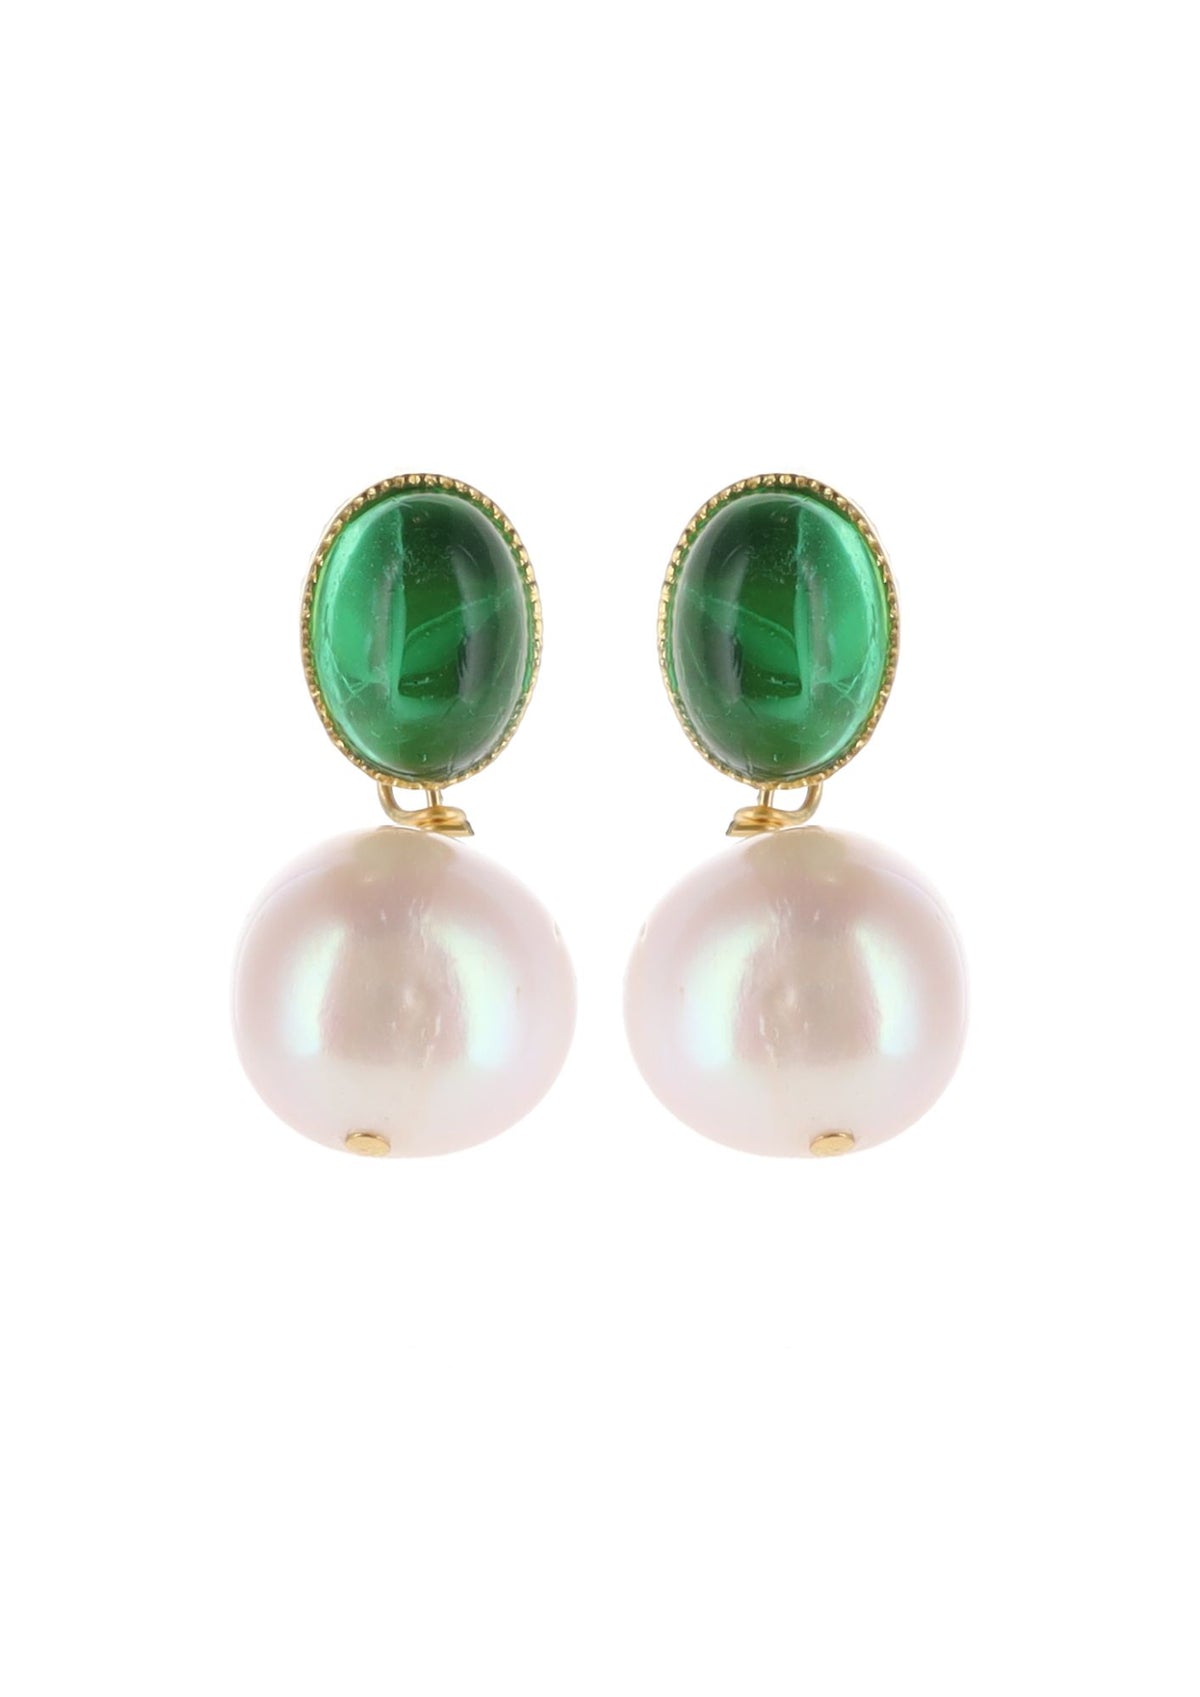 Clotilda Earrings in Green by Laurence Coste